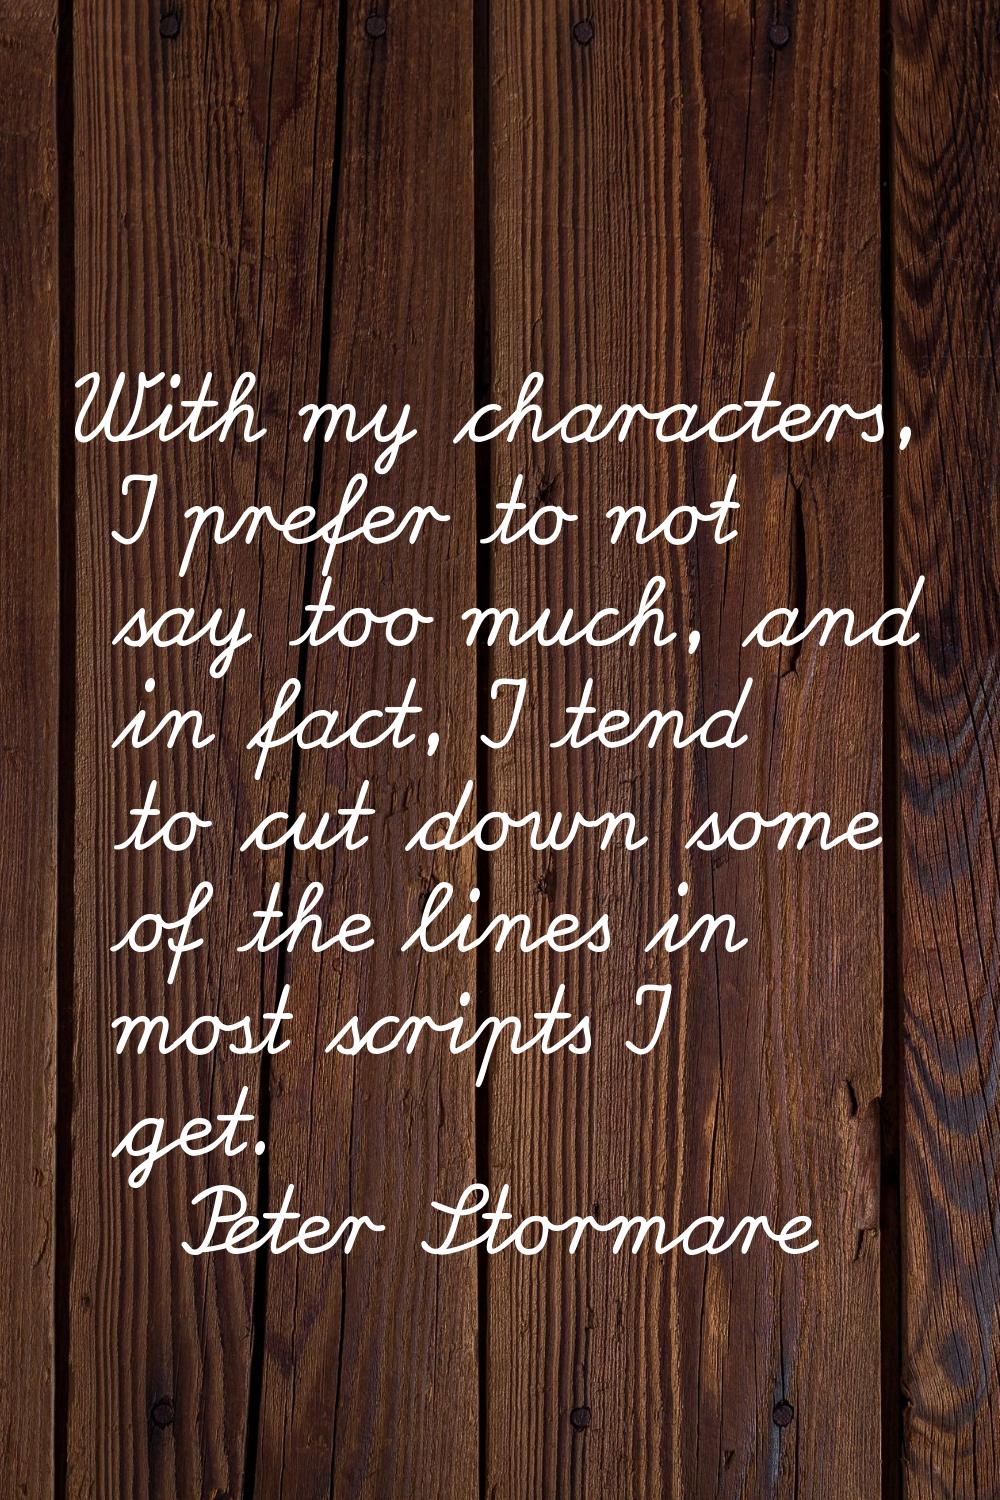 With my characters, I prefer to not say too much, and in fact, I tend to cut down some of the lines